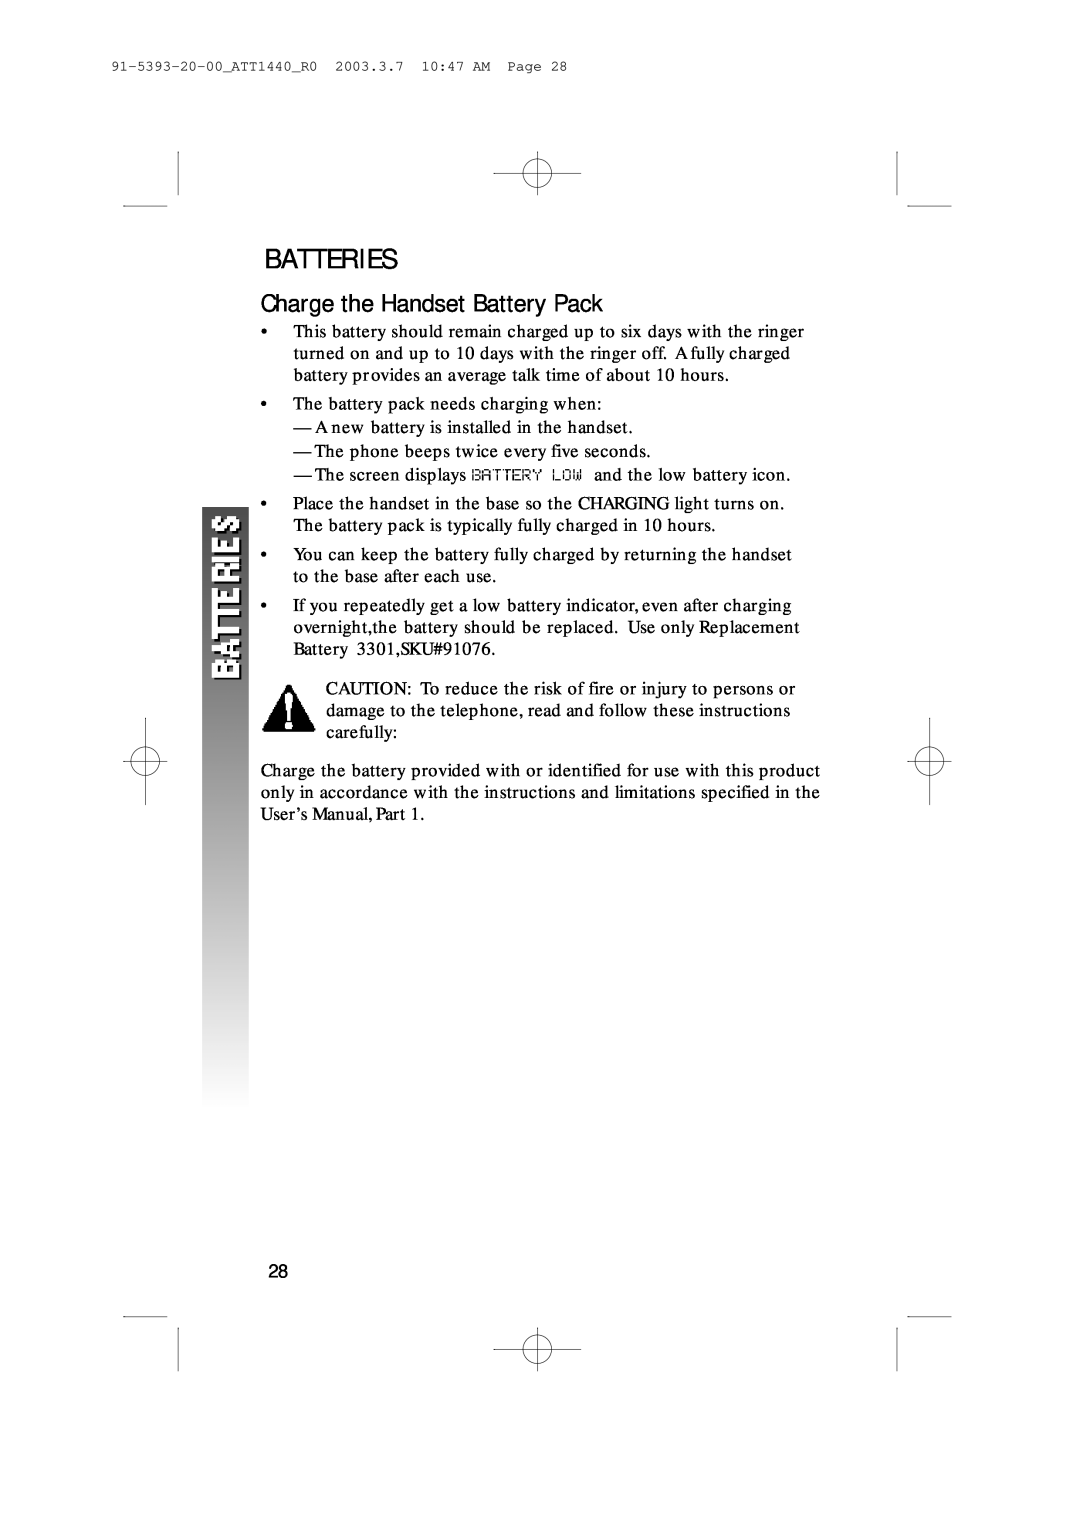 AT&T 1440 user manual Batteries, Charge the Handset Battery Pack 